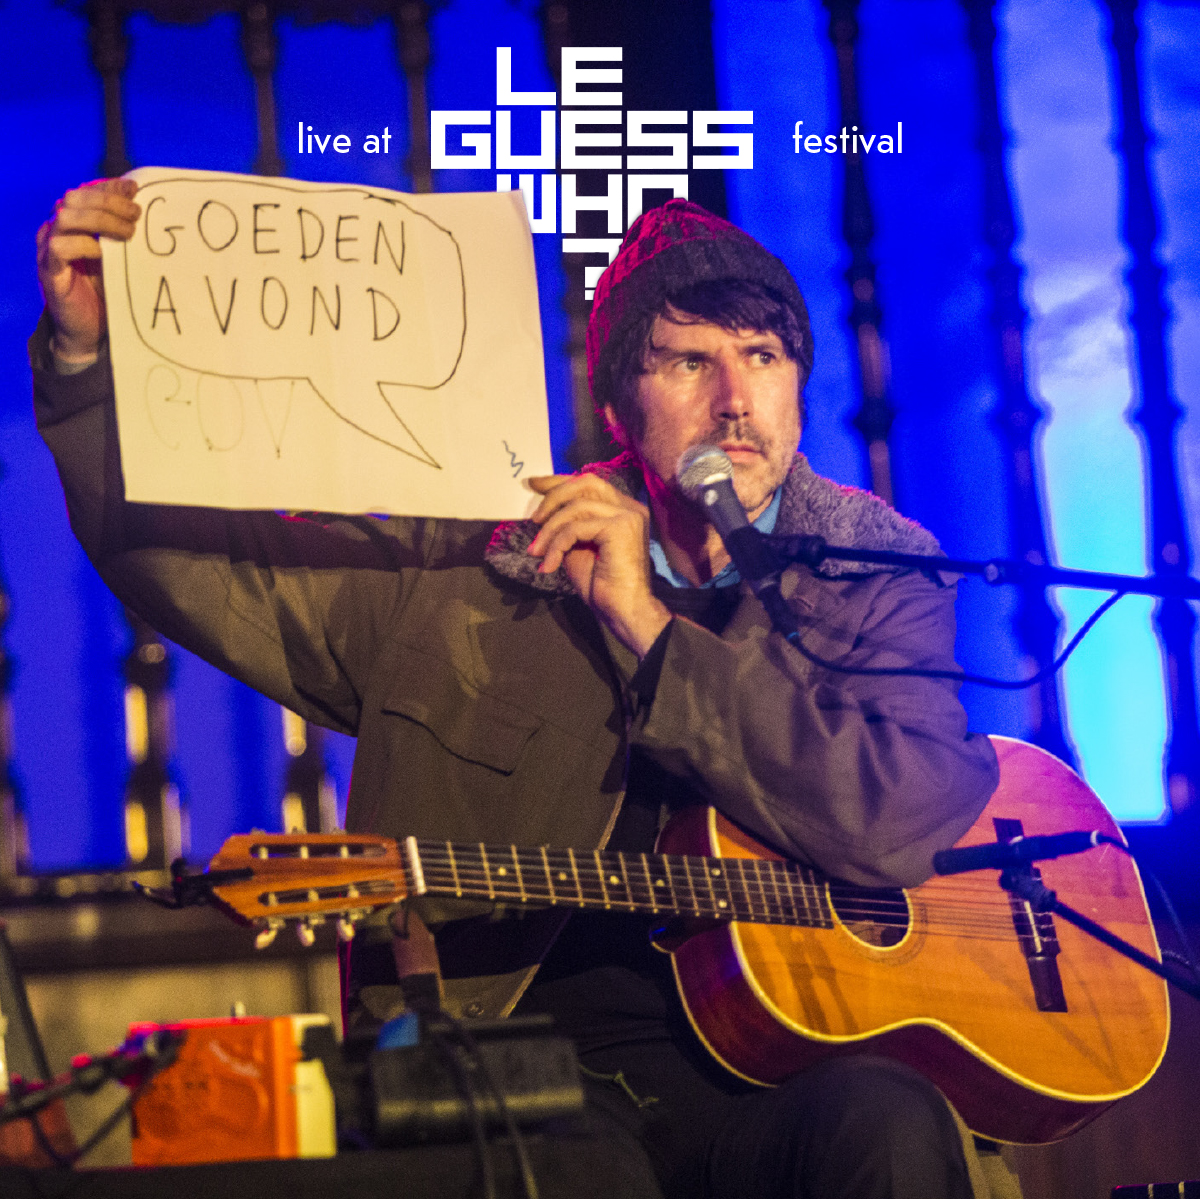 Listen to Gruff Rhys' full surprise performance at LGW17, via The Line of Best Fit